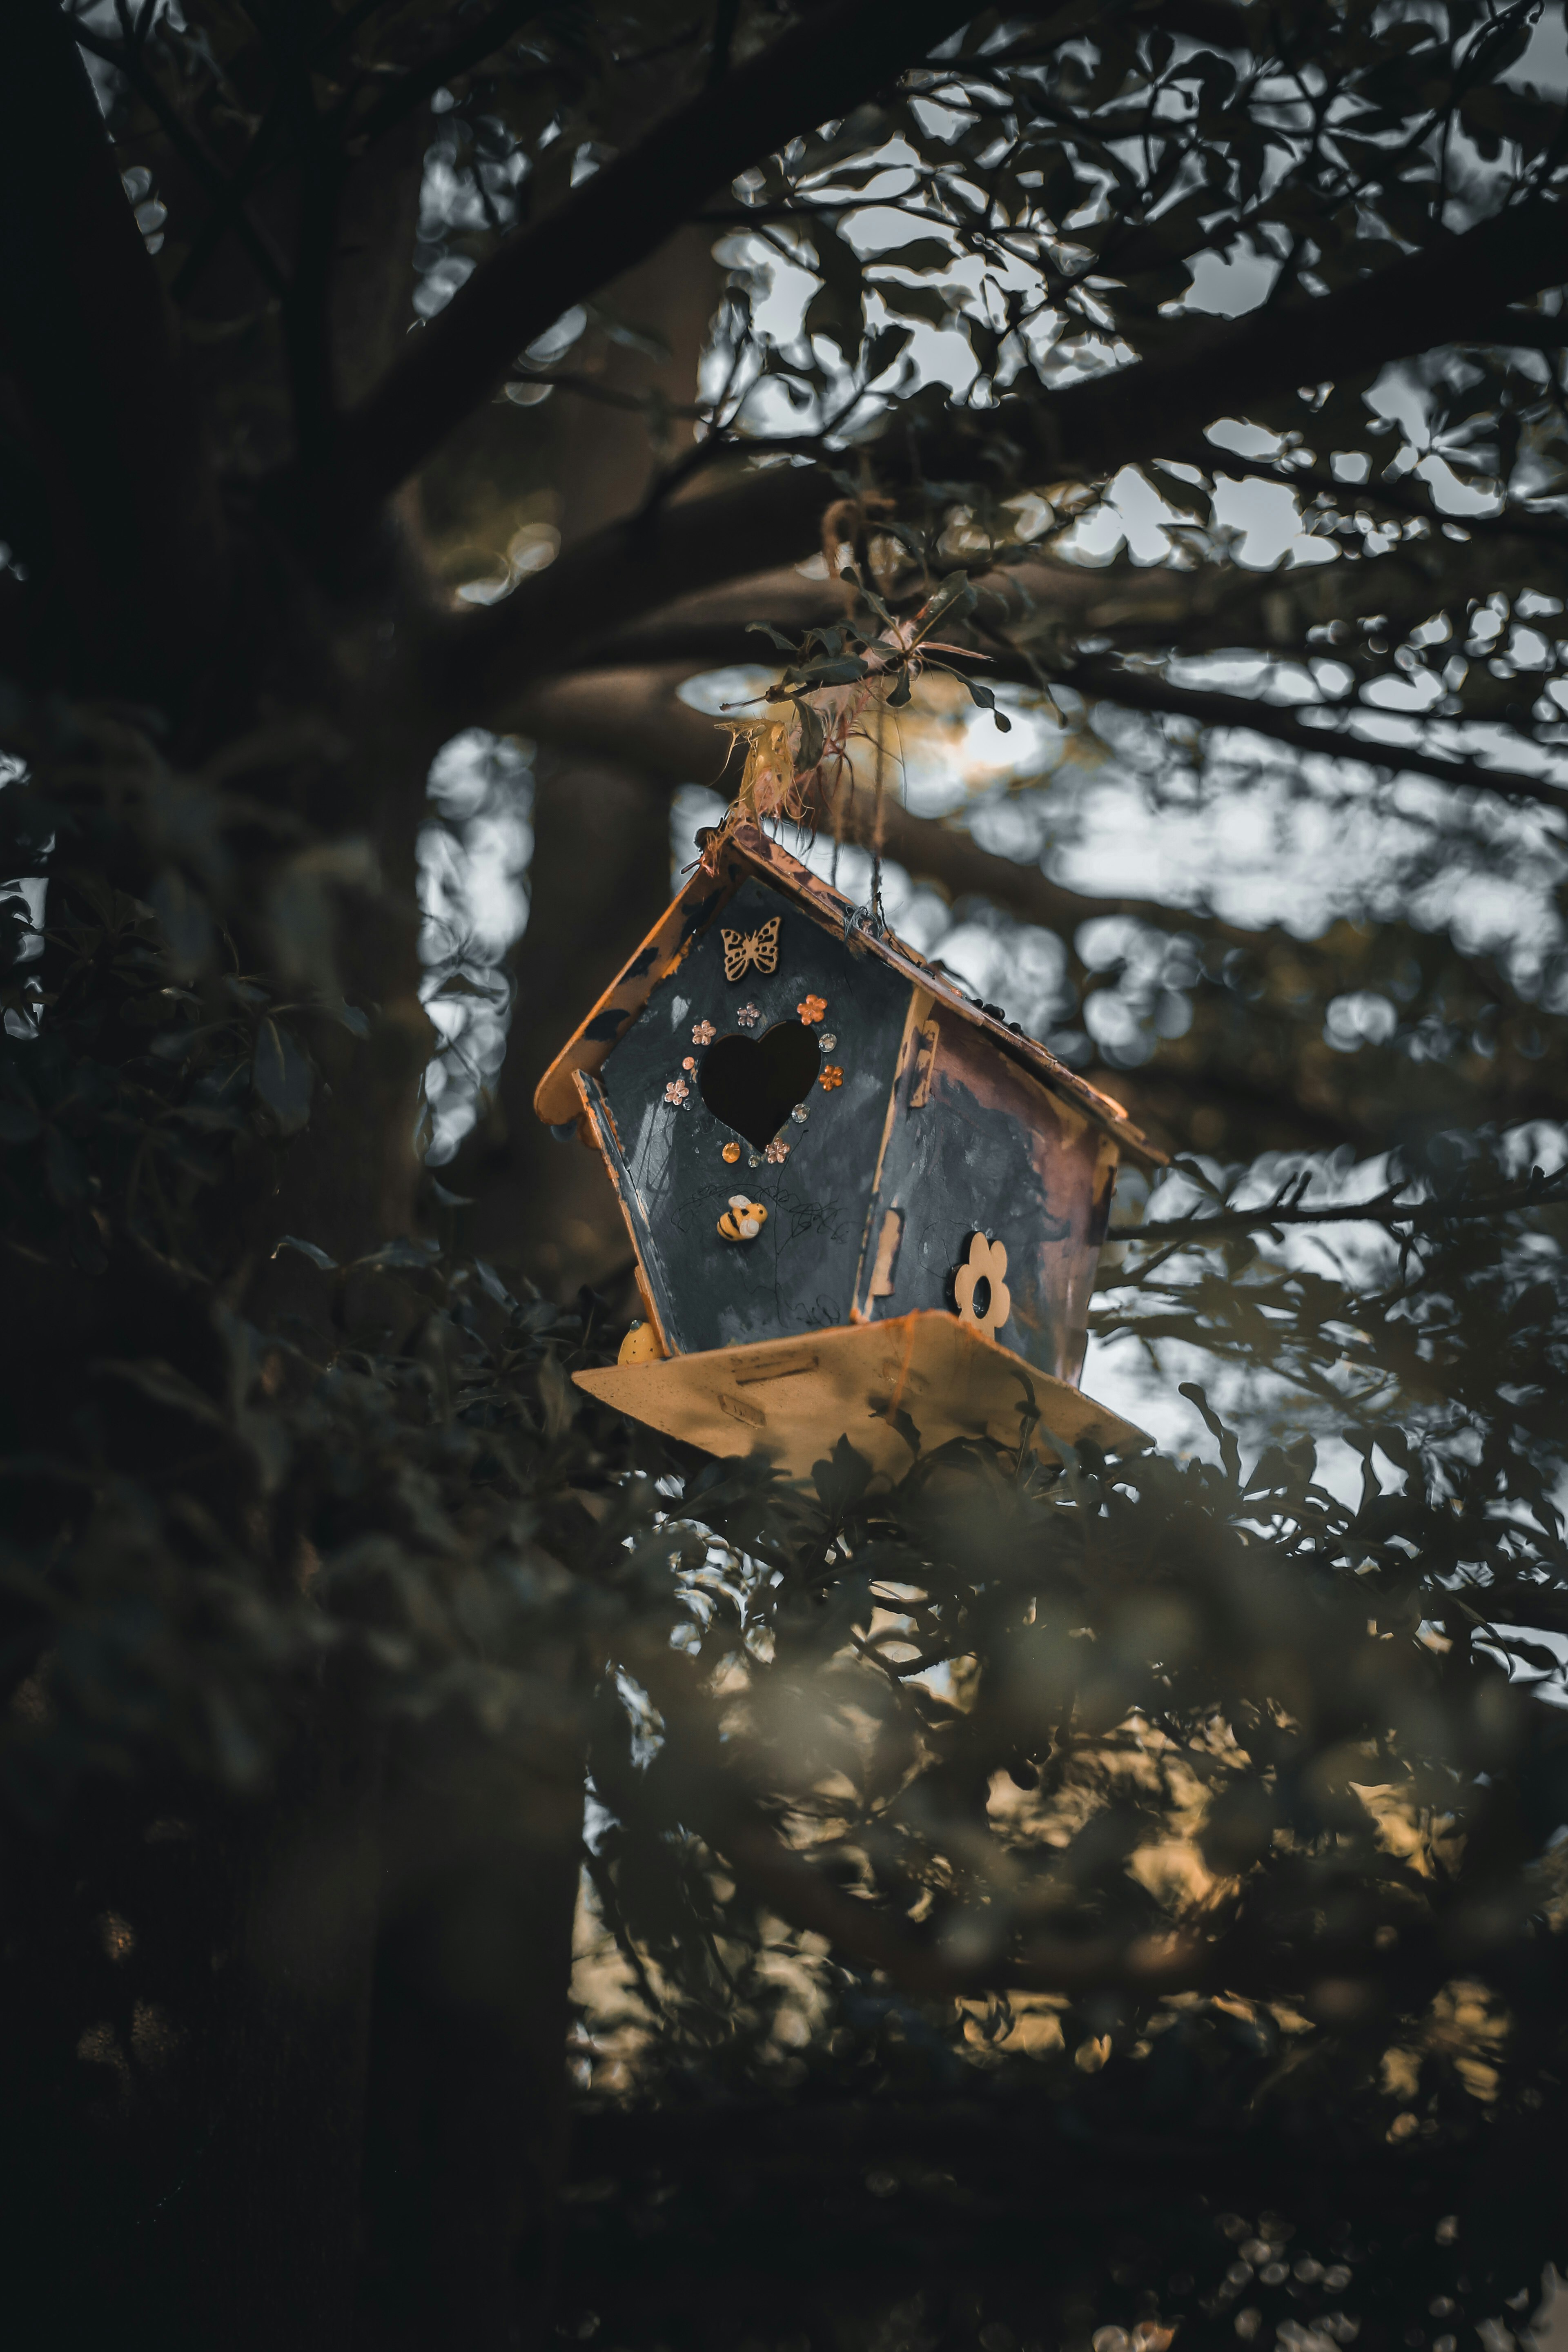 brown wooden bird house on tree branch during daytime